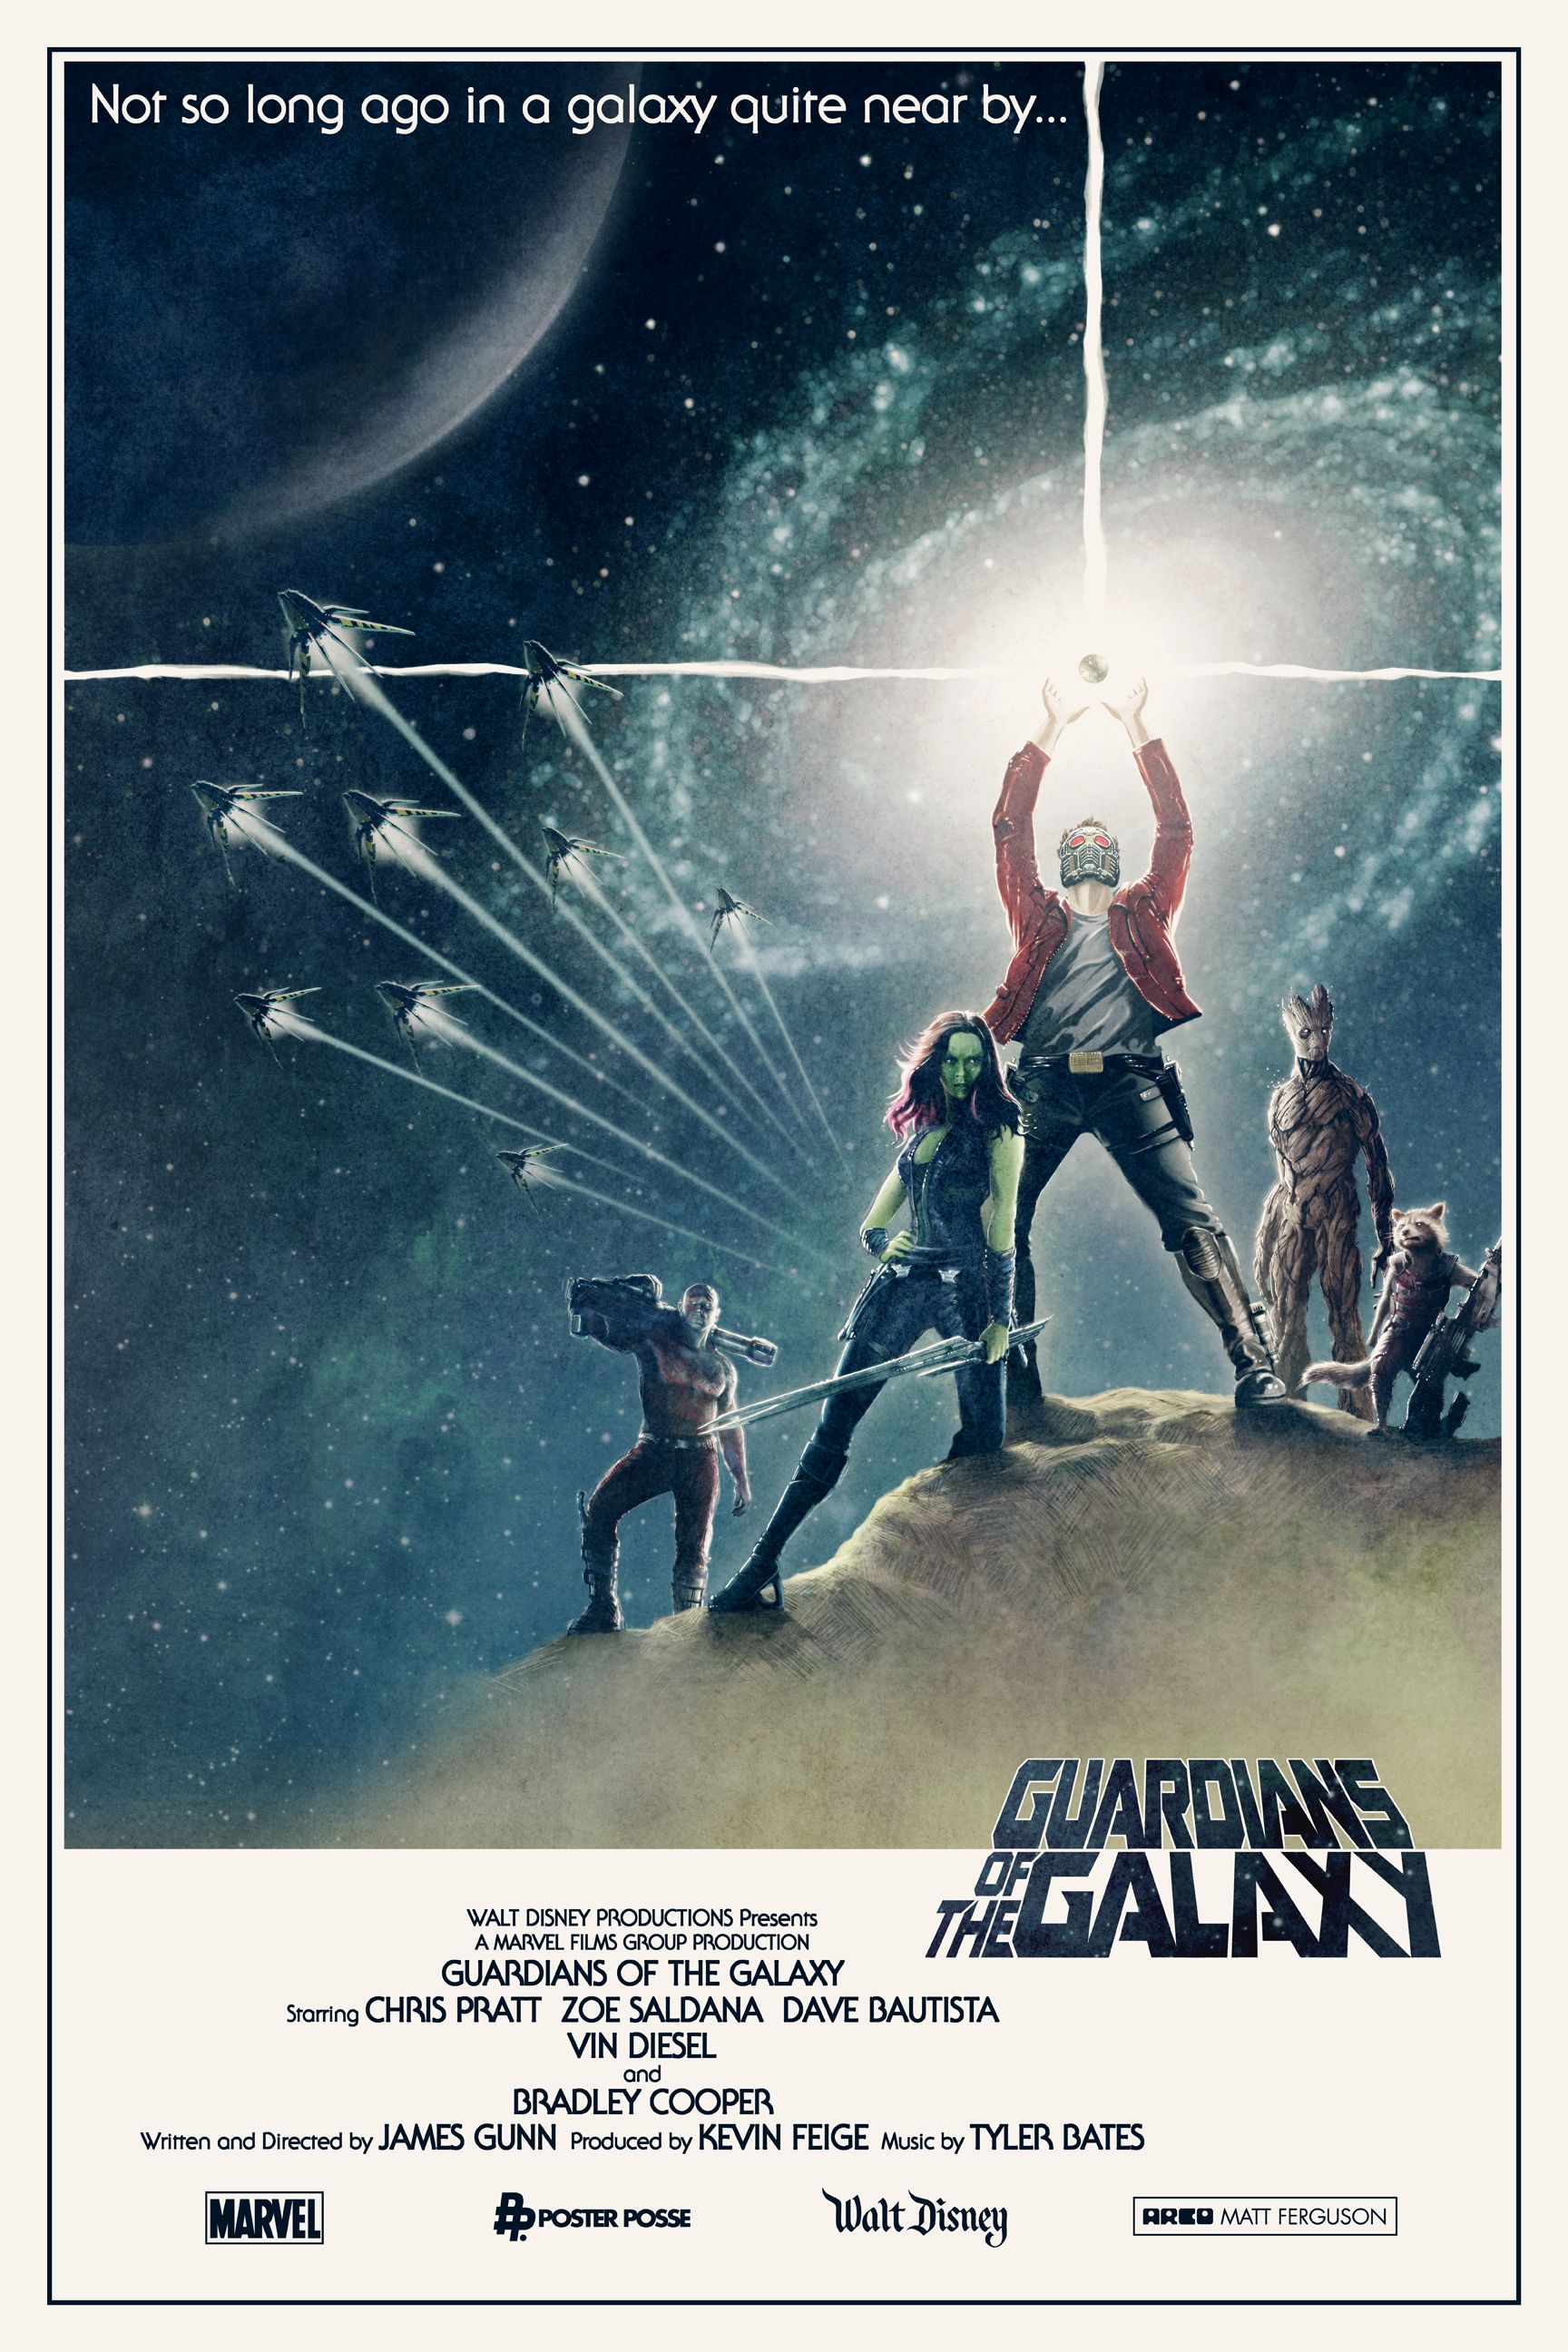 Guardians of the Galaxy Star Wars Poster